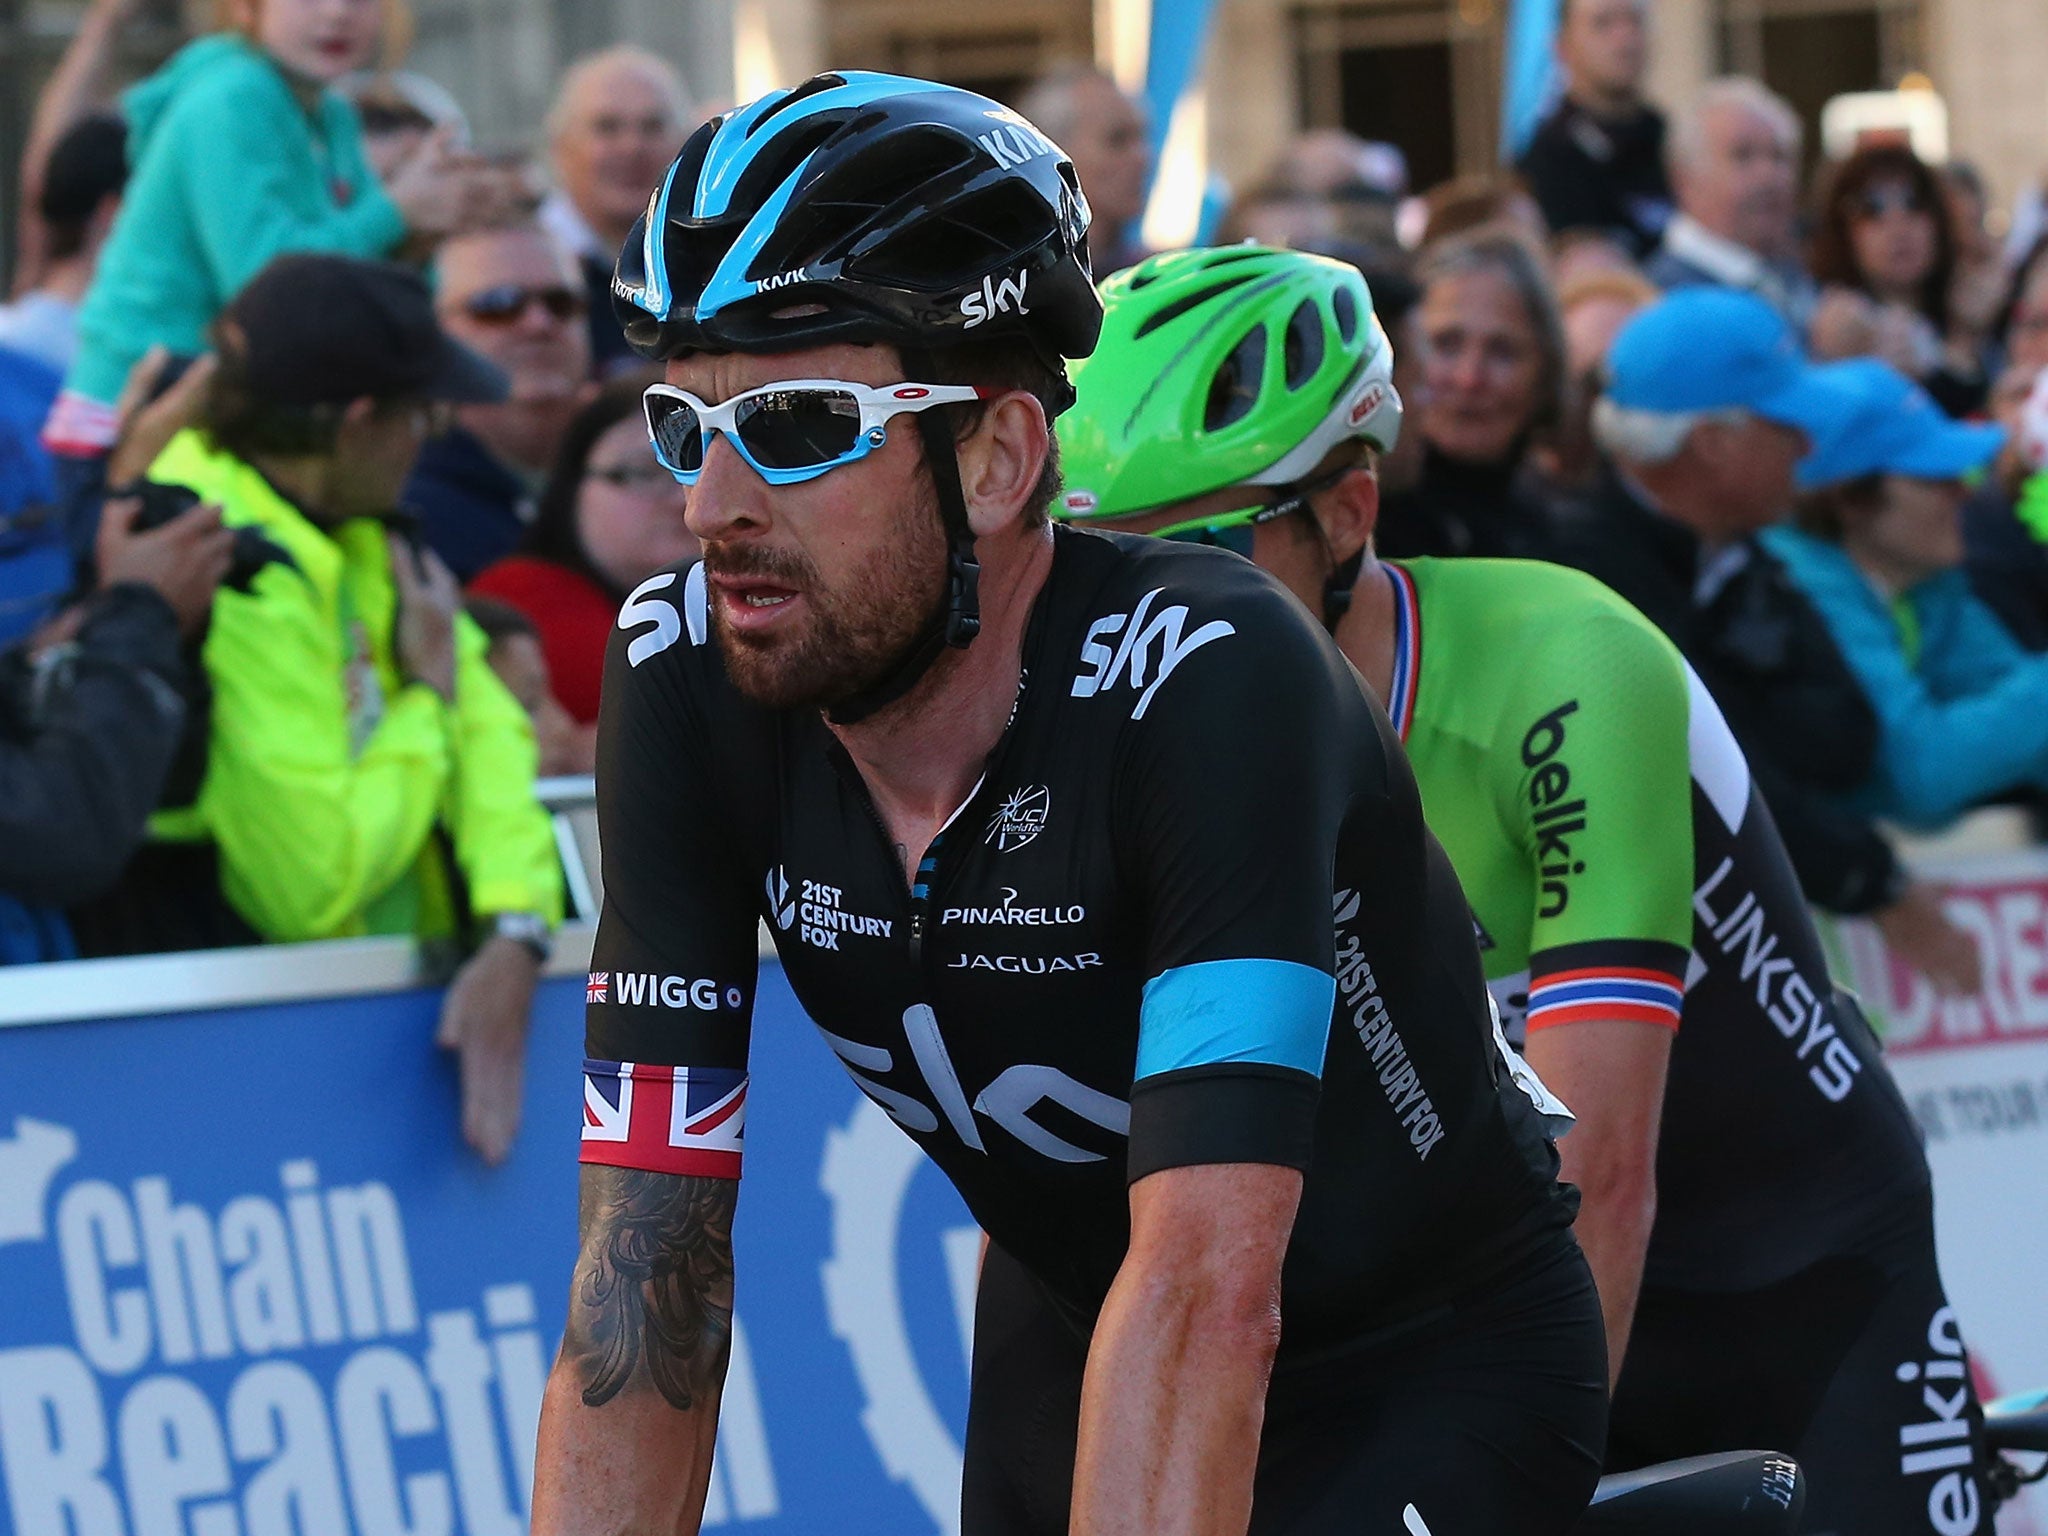 Sir Bradley Wiggins in action during the Tour of Britain